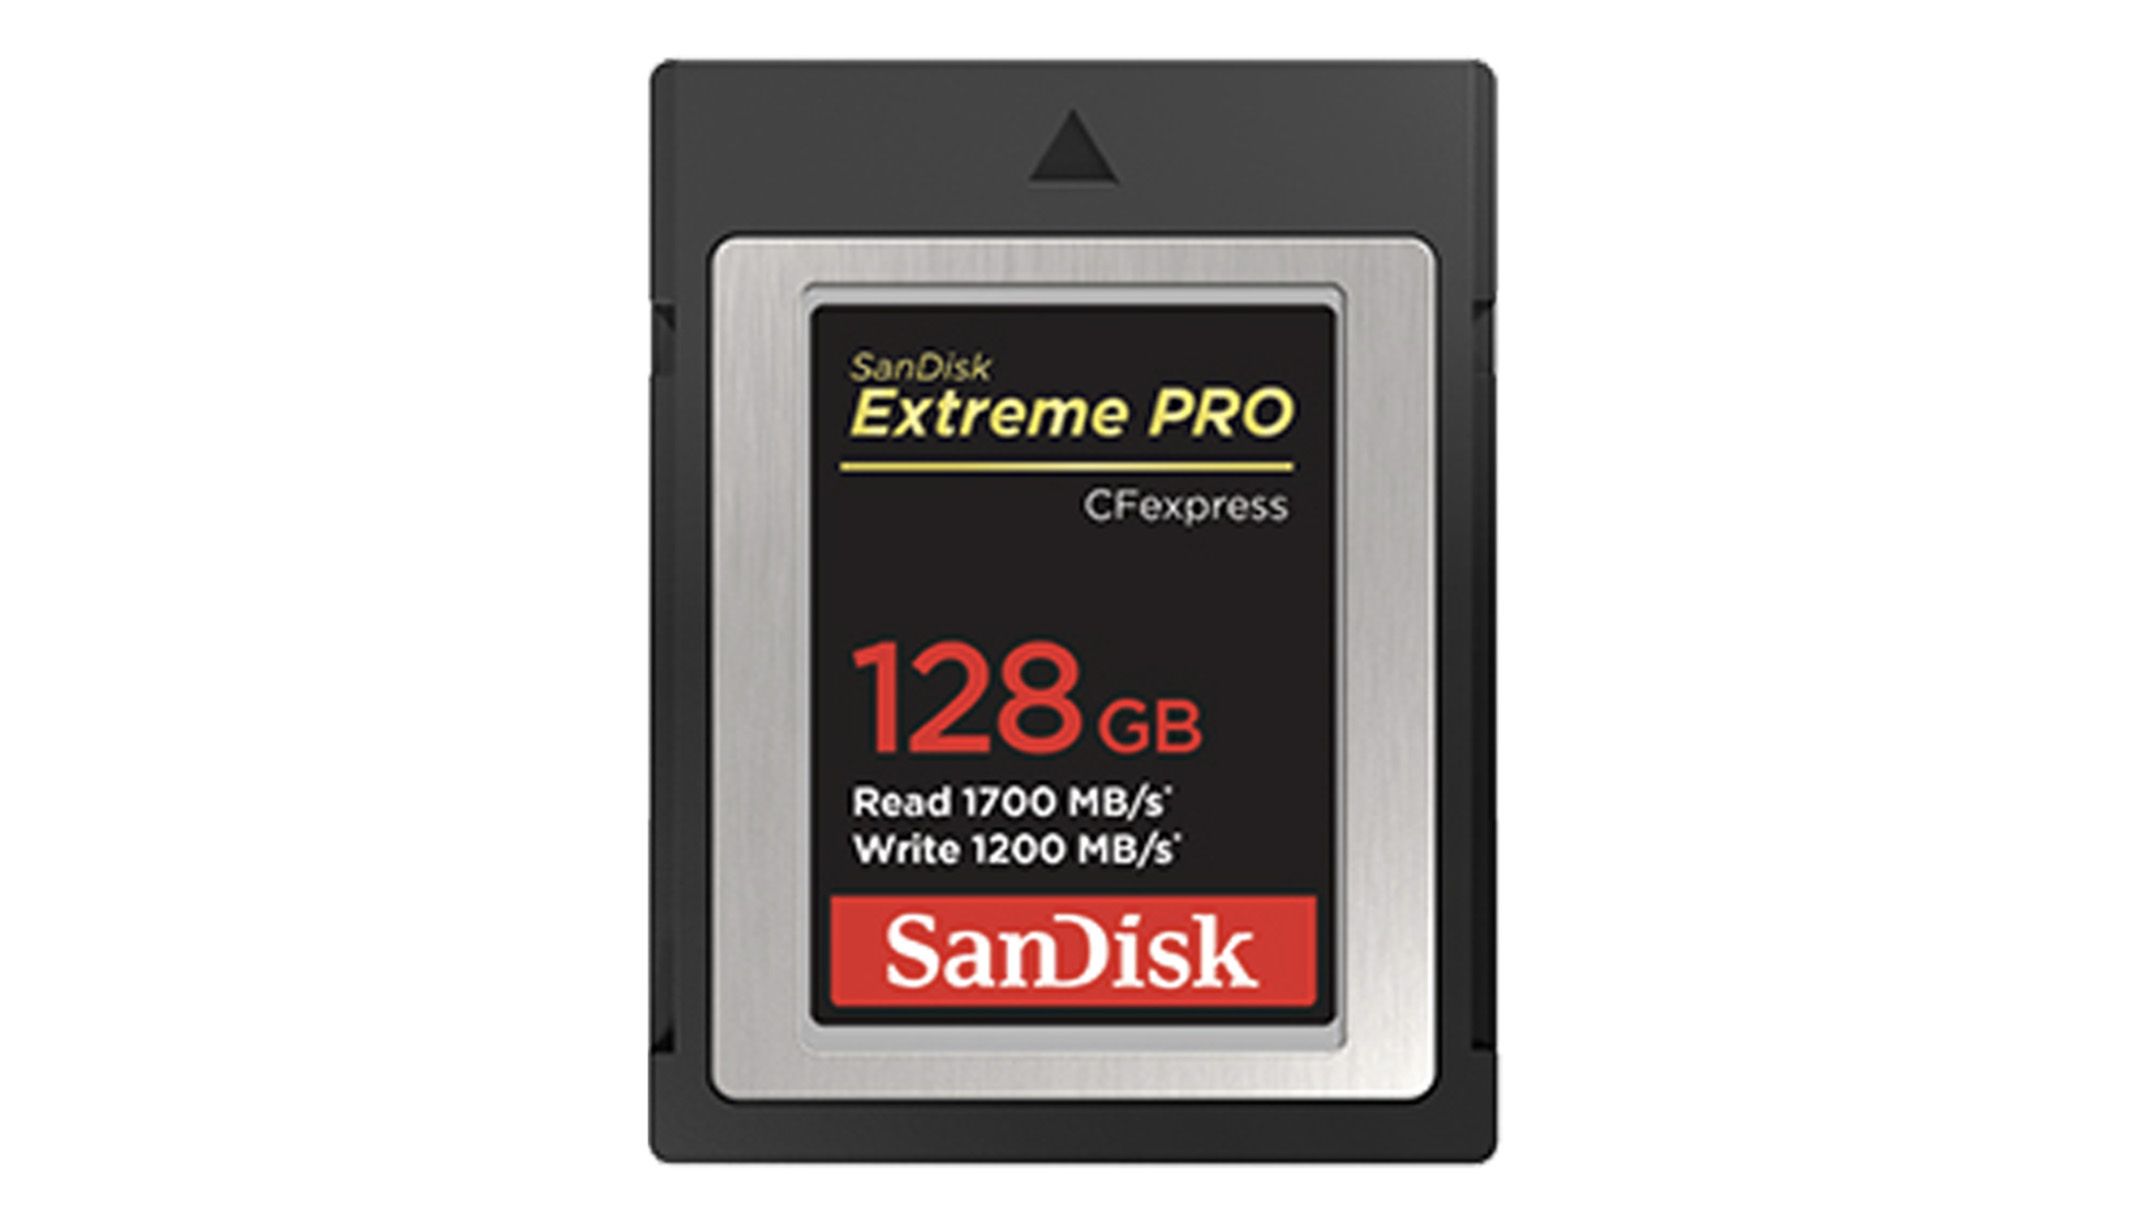 SANDISK - CFexpress Extreme Pro Card 128GB